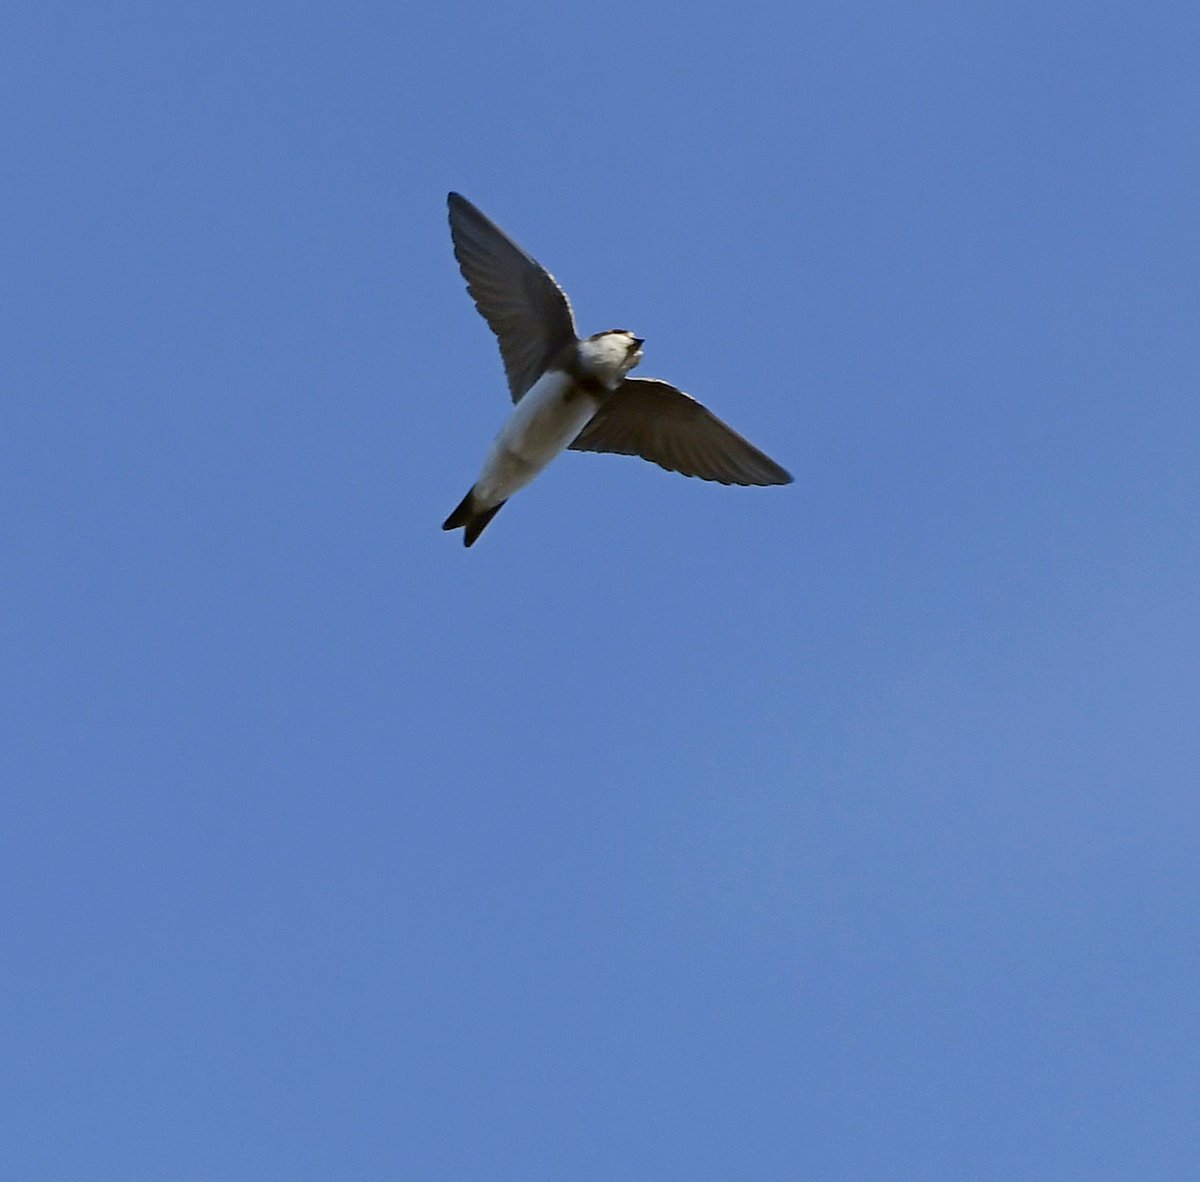 19. Sand Martin Another bird seen flying high over my garden, Sand Martins are the first Hirundines (Swallows & Martins) to arrive in the UK. From underneath, the easiest way to tell them apart from House Martins is by their dark breast band. #LockdownGardenBirdsSeen 